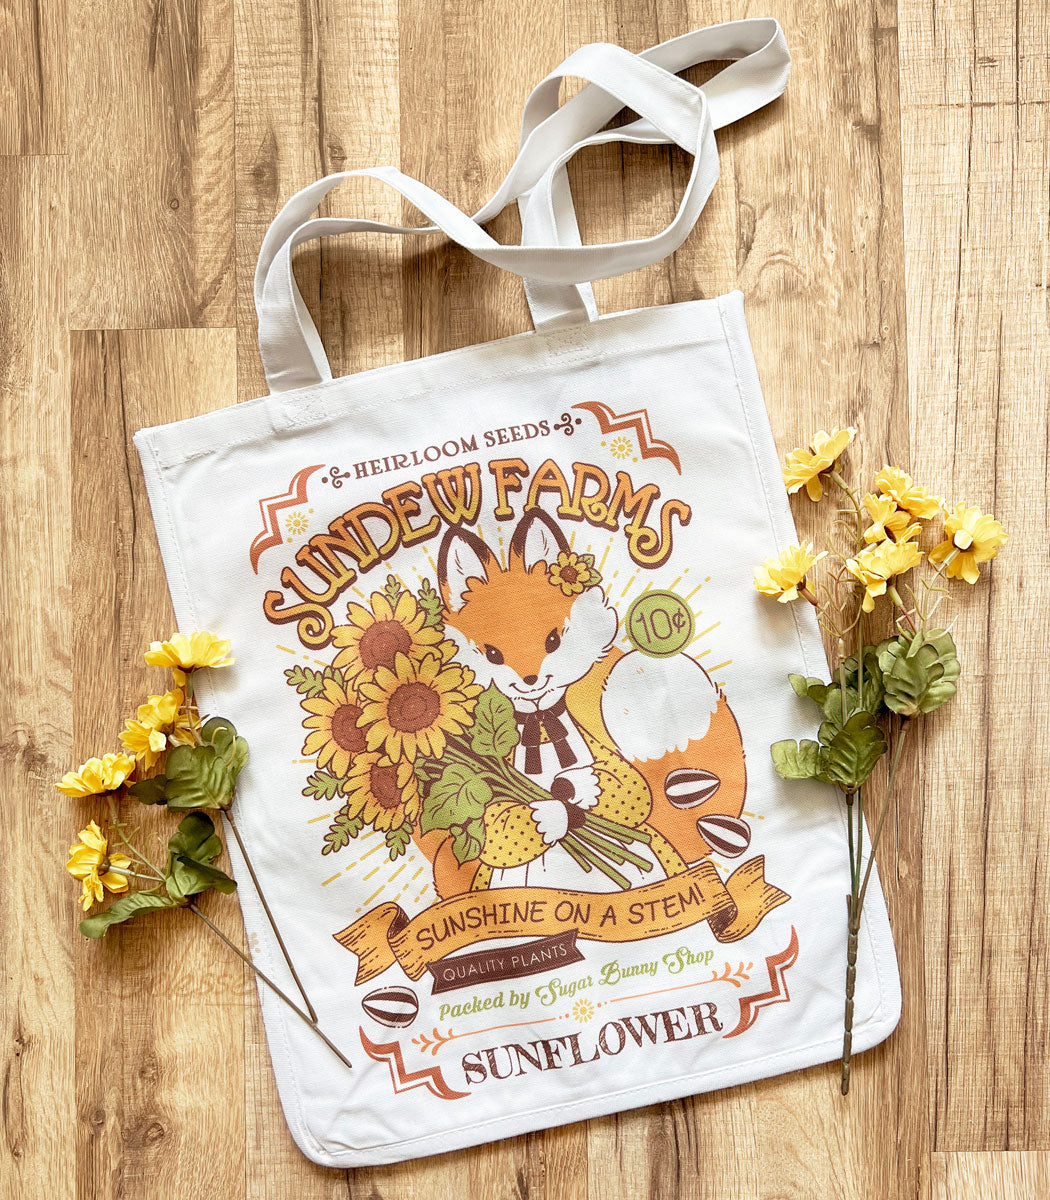 Old Fashioned Tote Bag